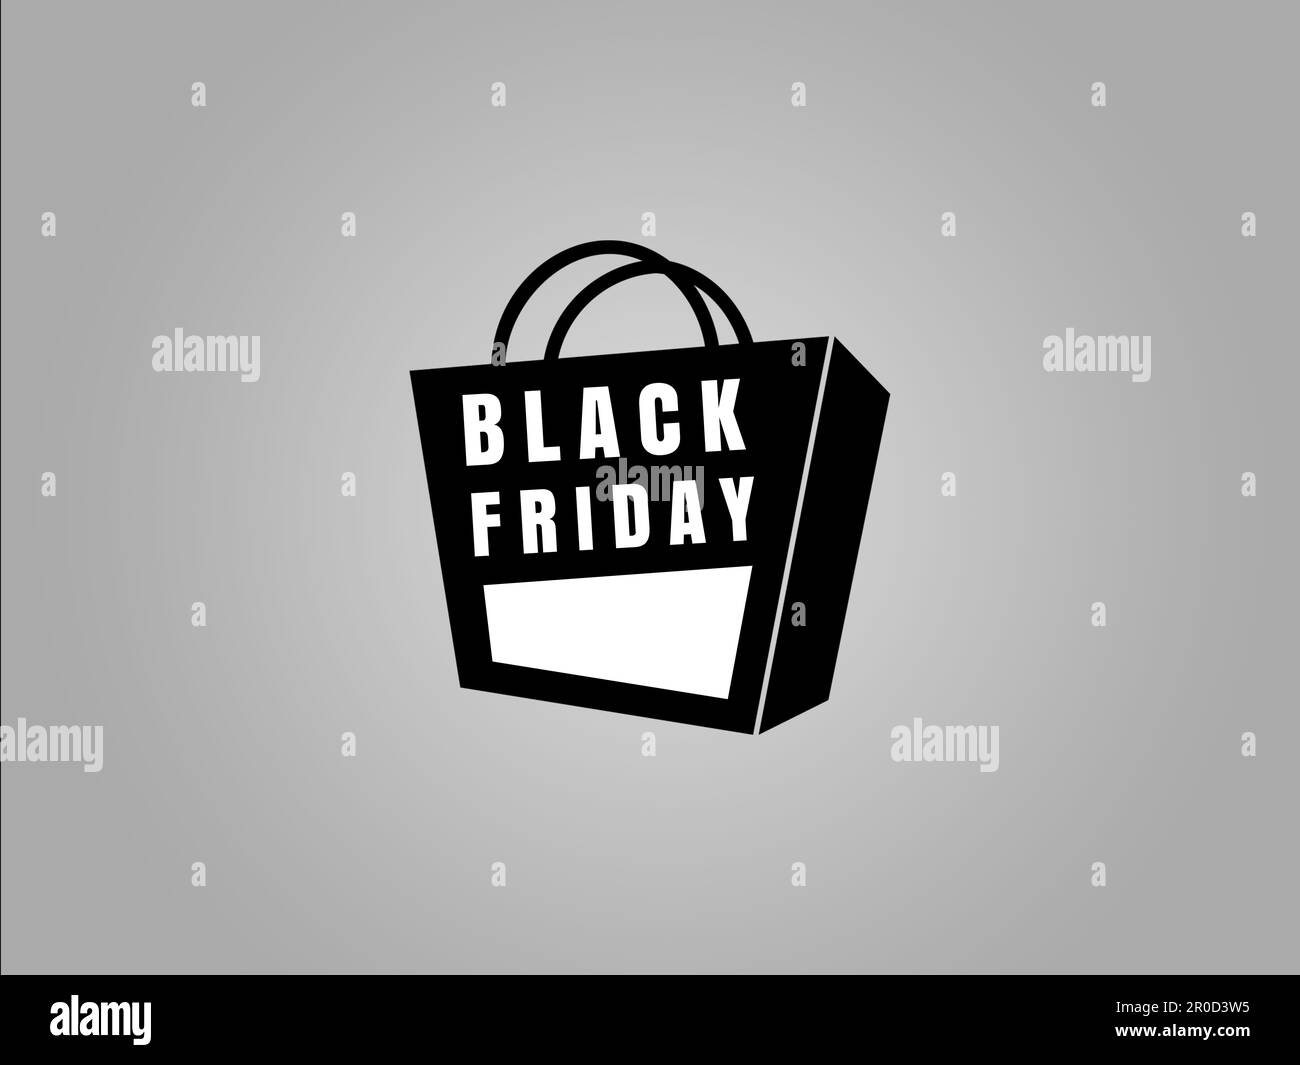 This image features a black shopping bag with the words 'Black Friday' printed on it, set against a plain gray background Stock Photo